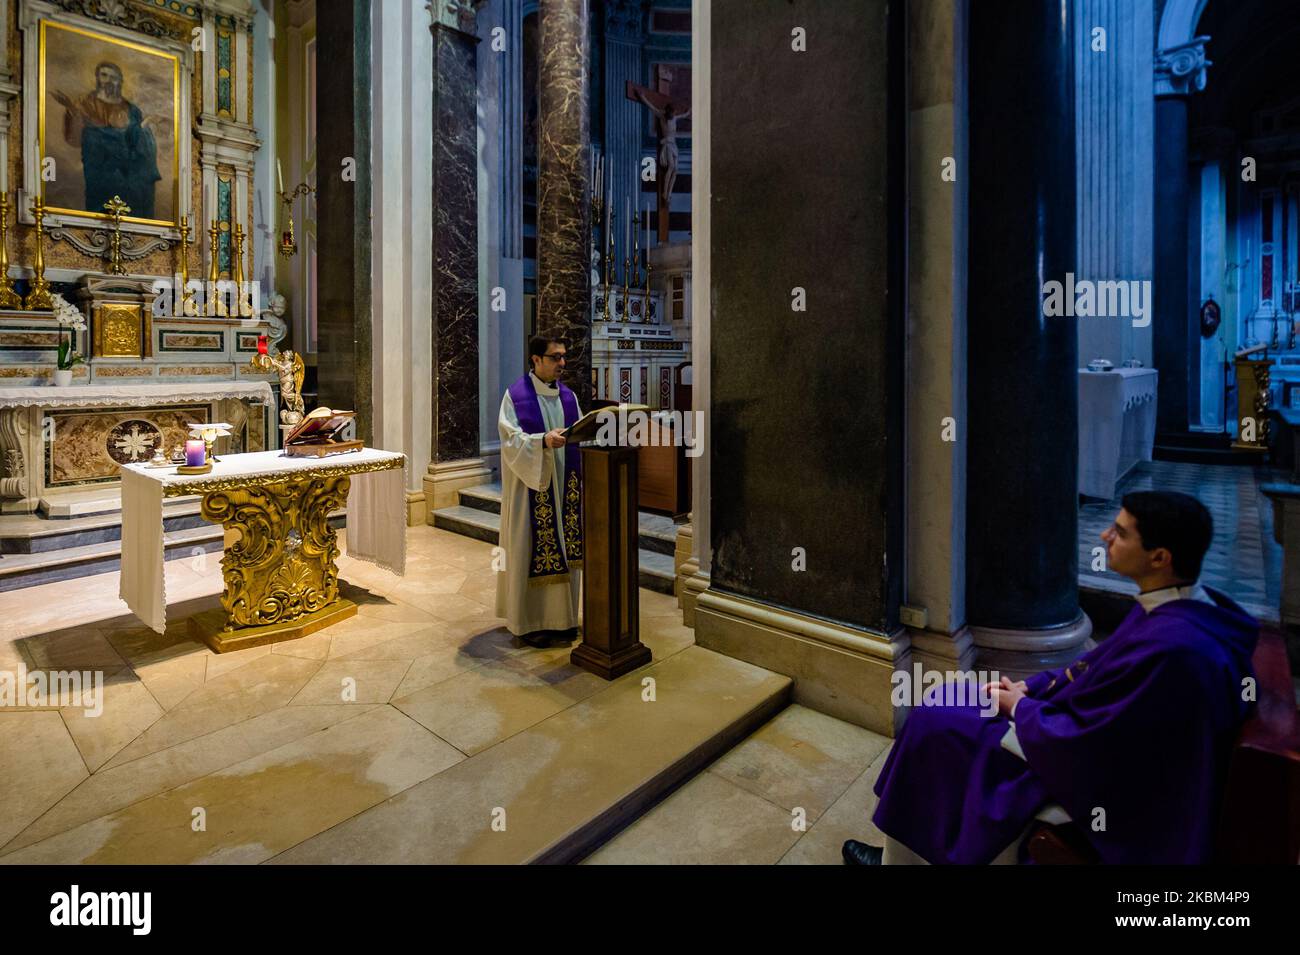 Priests Don Nico Tempesta and Don Antonio Picca hold daily mass in the Immaculate Church of Molfetta behind closed doors during the coronavirus emergency period on April 8, 2020 (Photo by Davide Pischettola/NurPhoto) Stock Photo